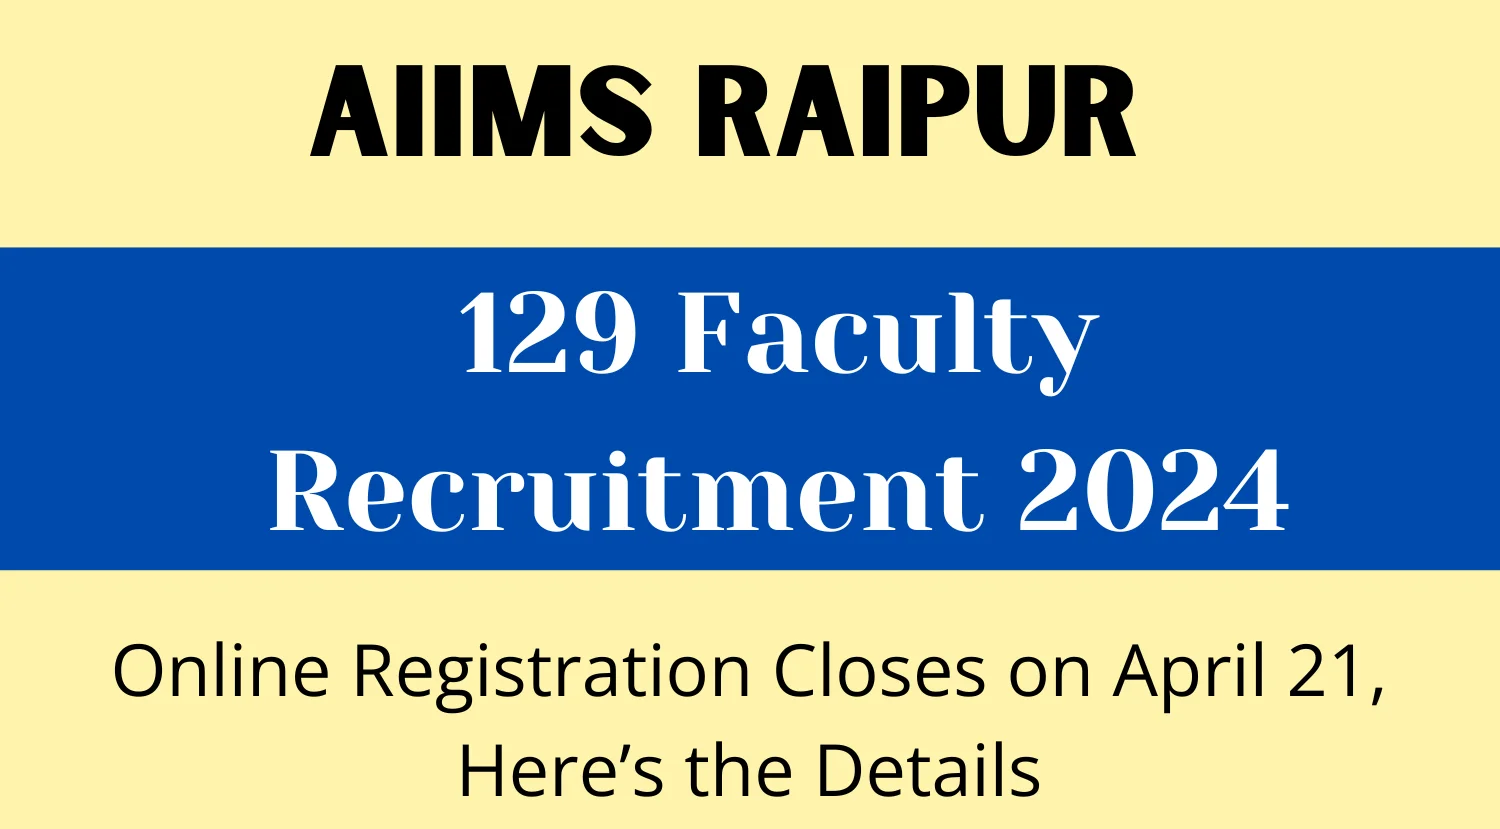 AIIMS Raipur 129 Faculty Recruitment 2024 - Online Registration Closes on April 21 Heres the Details